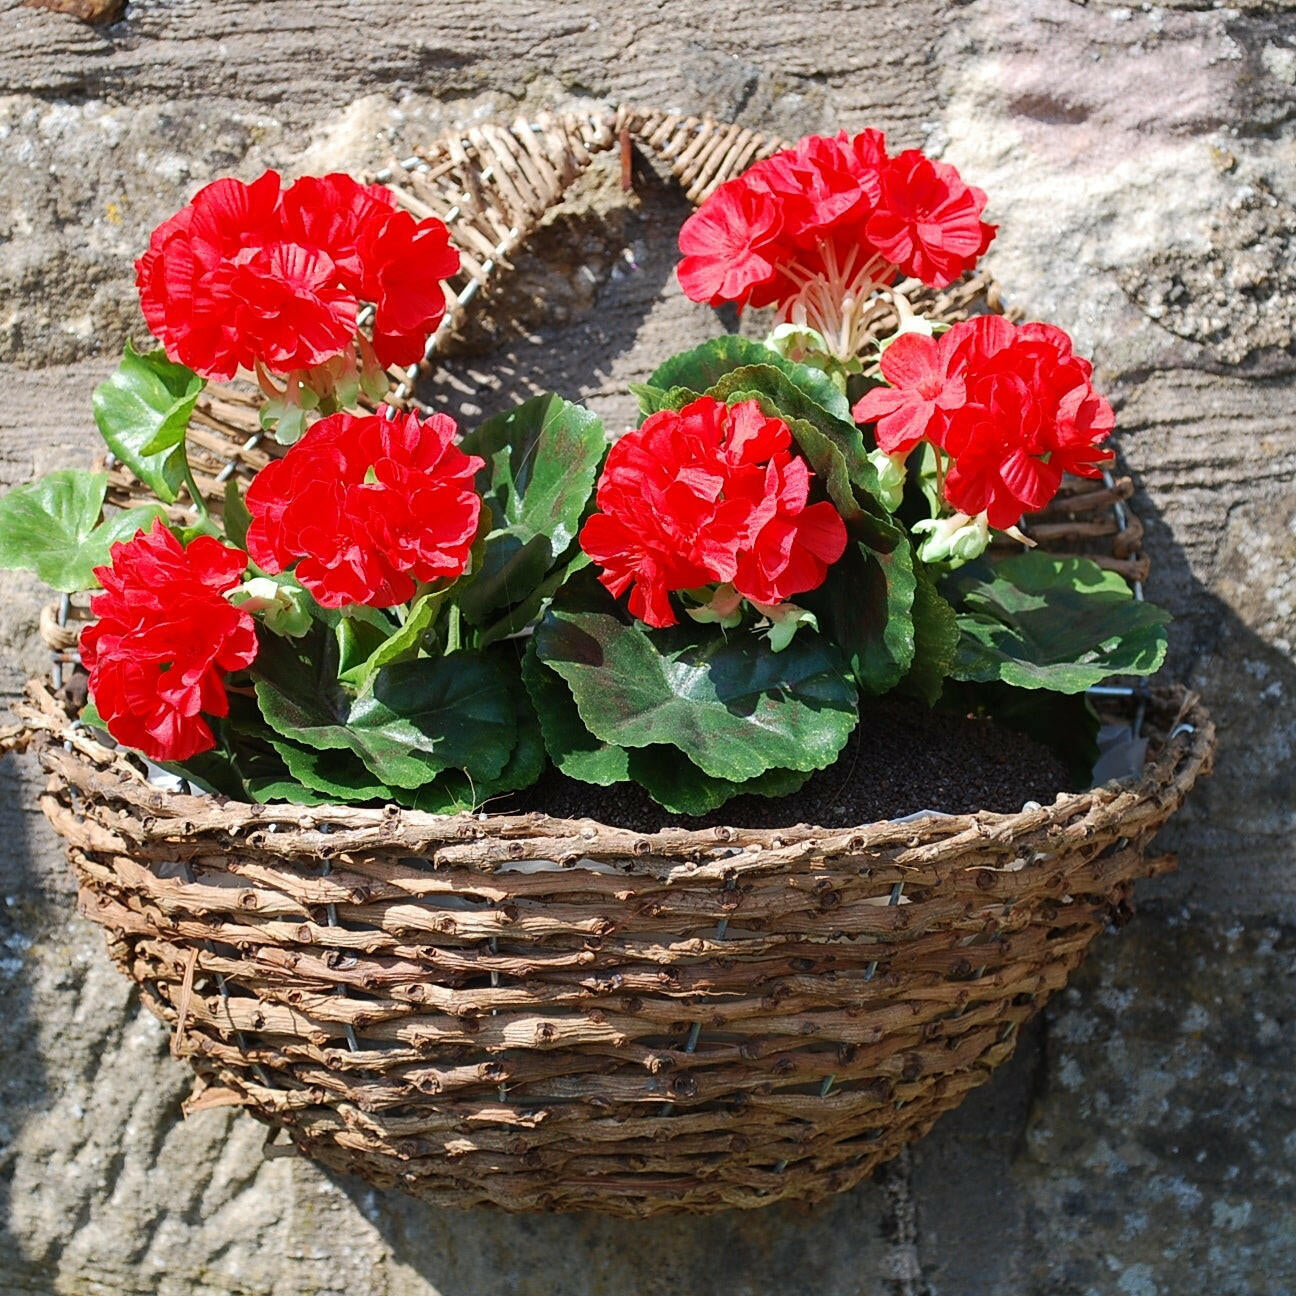 A customers basket in situ, note this is the previous Brown coloured basket